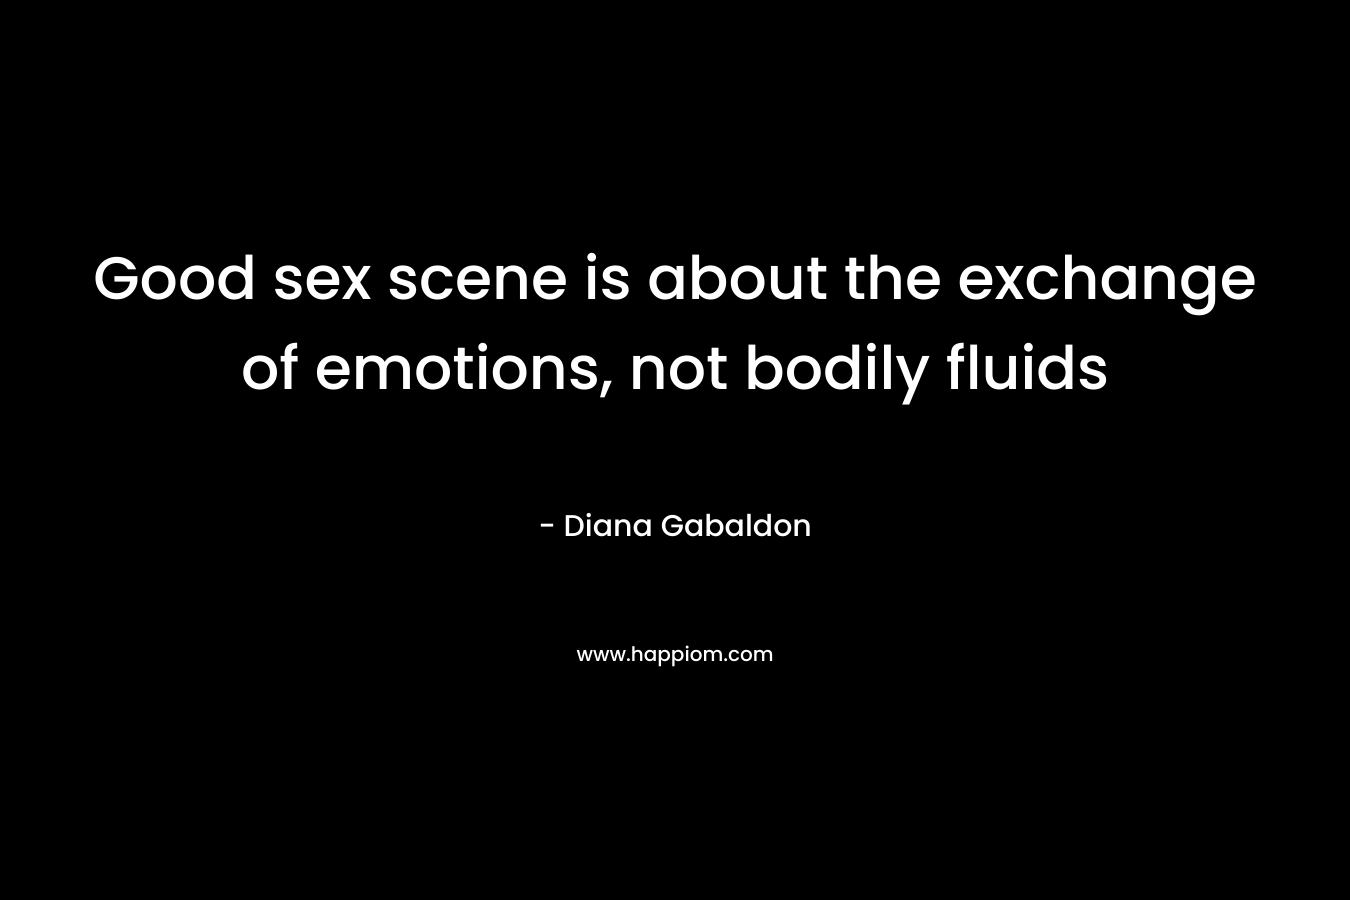 Good sex scene is about the exchange of emotions, not bodily fluids